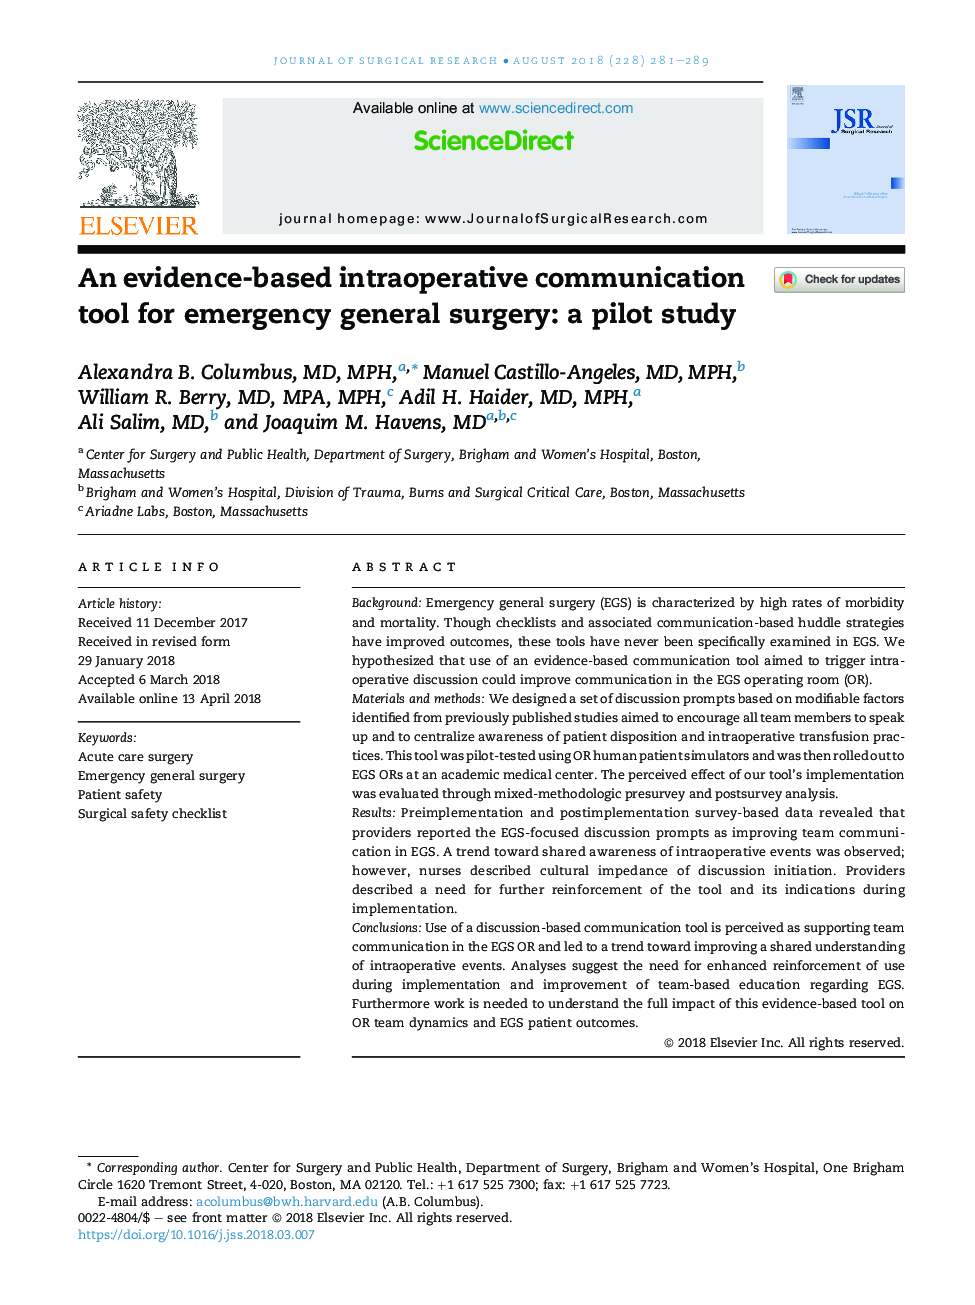 An evidence-based intraoperative communication tool for emergency general surgery: a pilot study